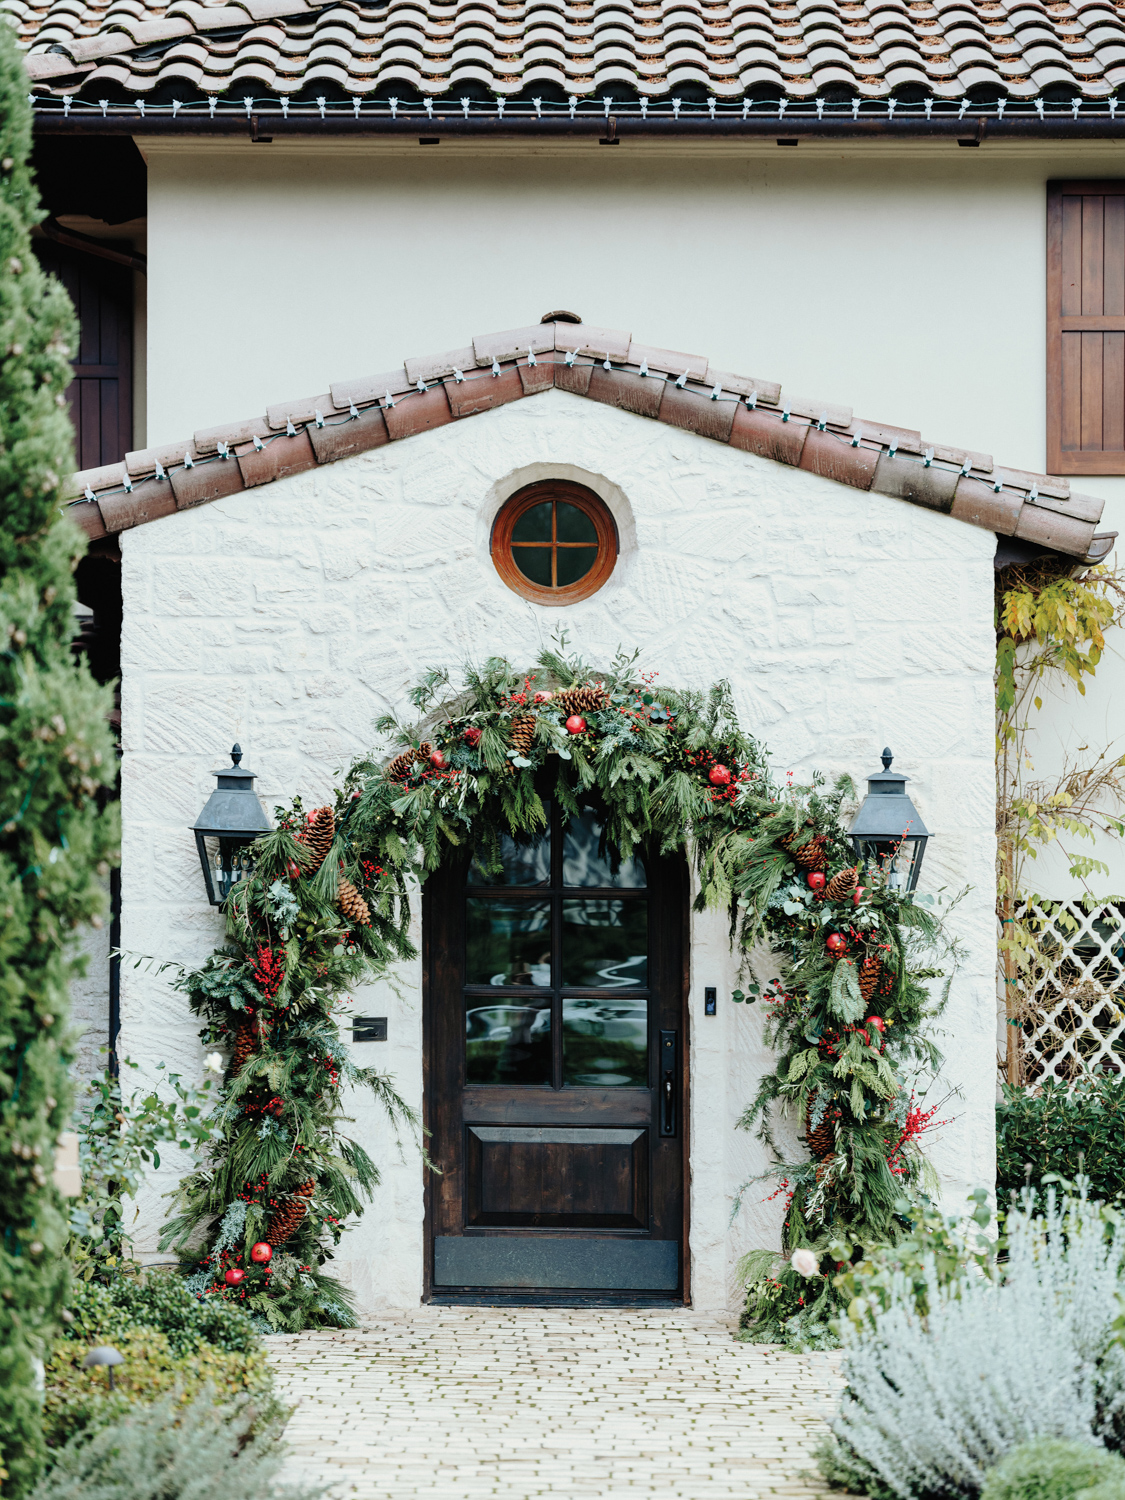 Exterior of white stucco building with archway made of evergreens and red florals over entry